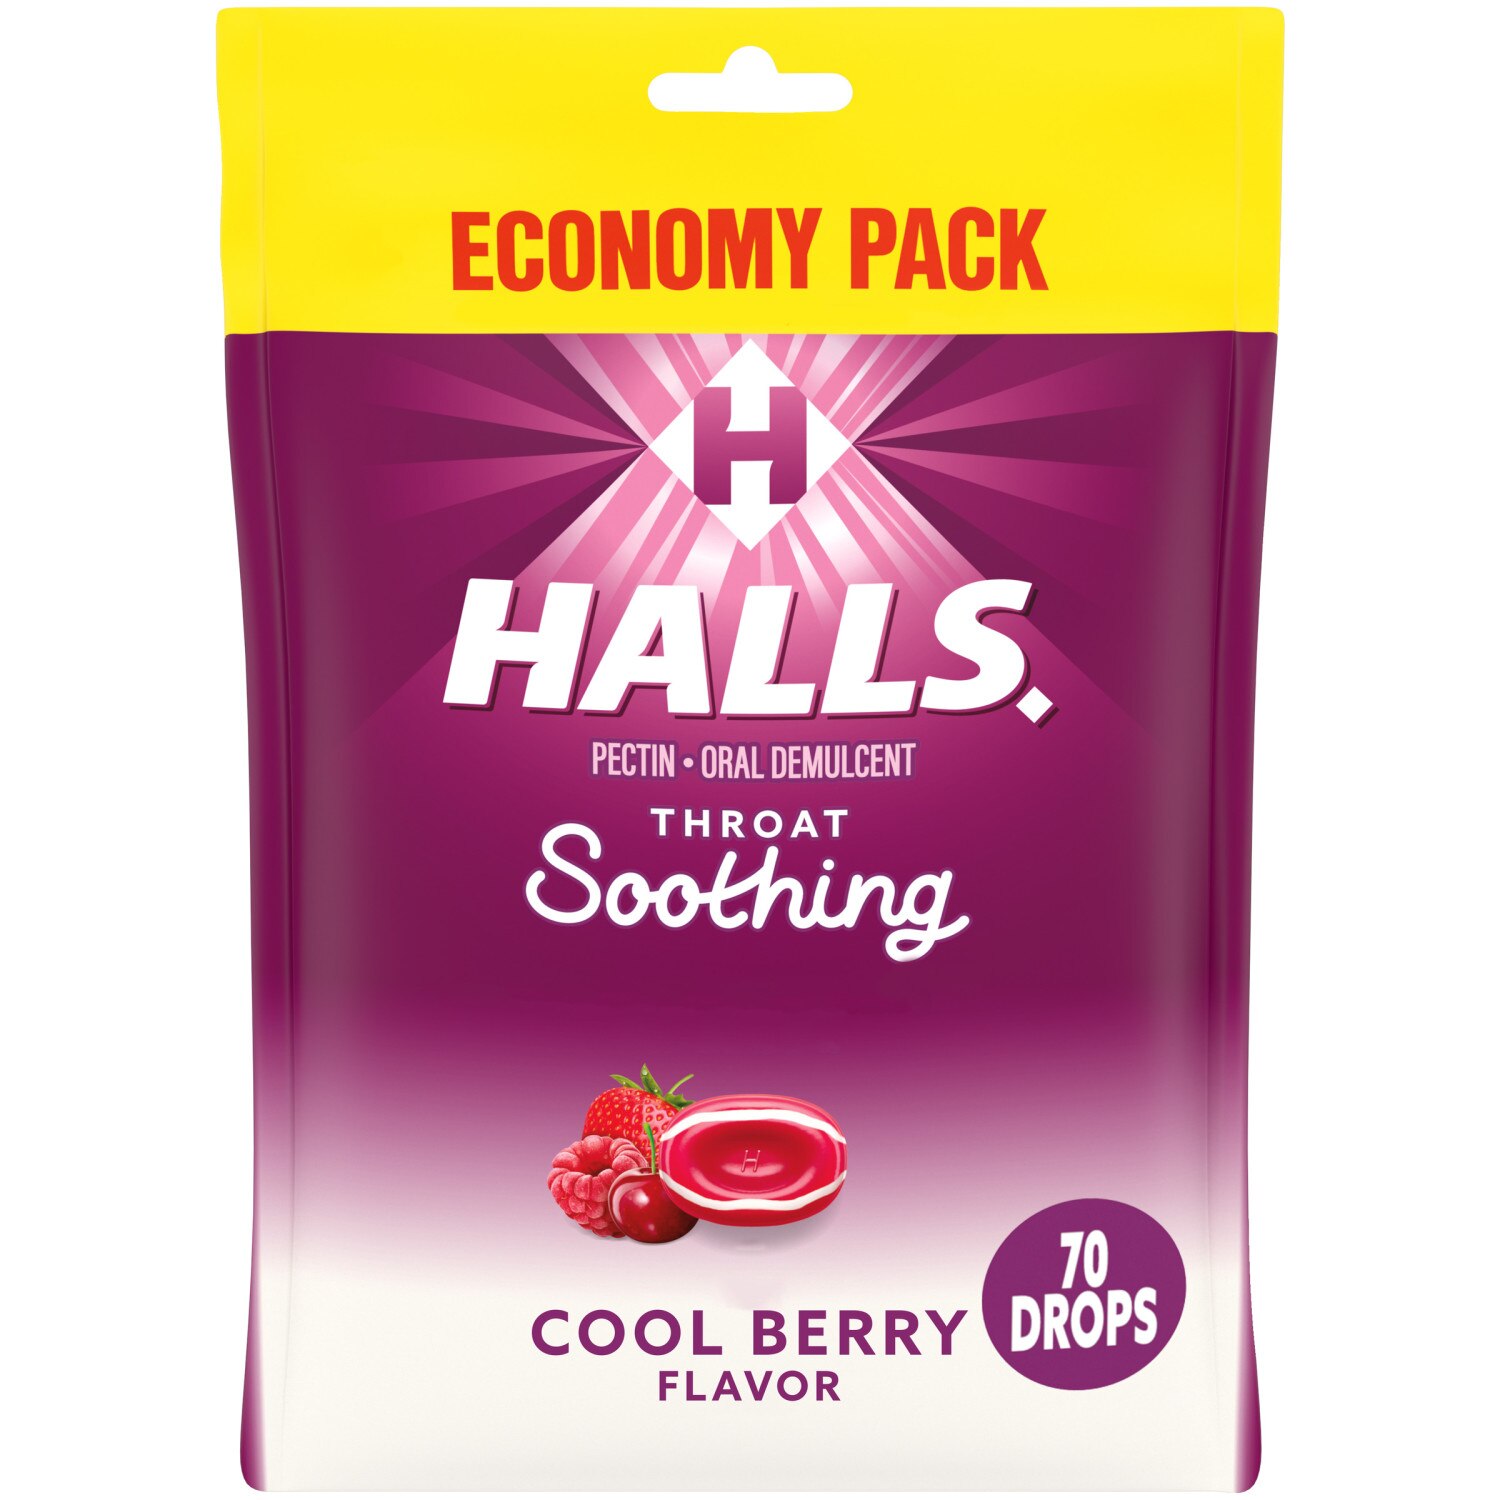 HALLS Throat Soothing Cool Berry Throat Drops, Economy Pack, 70 CT